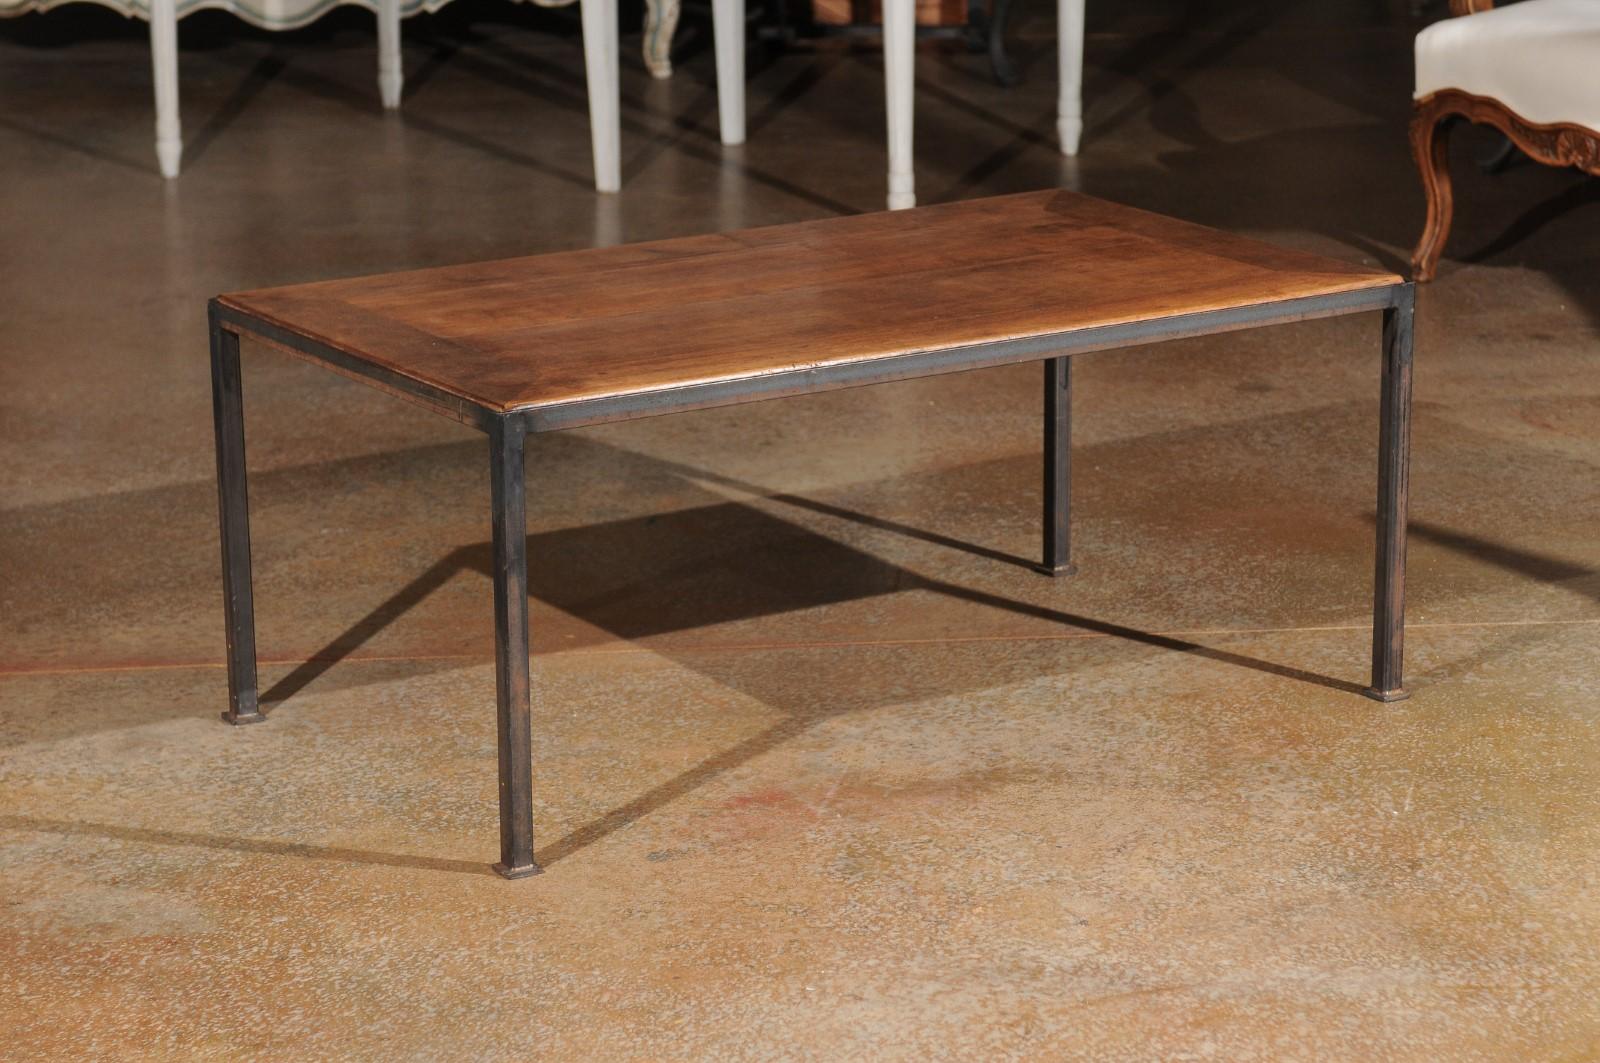 A French coffee table made from old walnut and raised on an iron base. With its clean lines and contrasting colors, this coffee table will bring a stylish presence to any home. Presenting a rectangular planked top boasting a lovely patina, the table